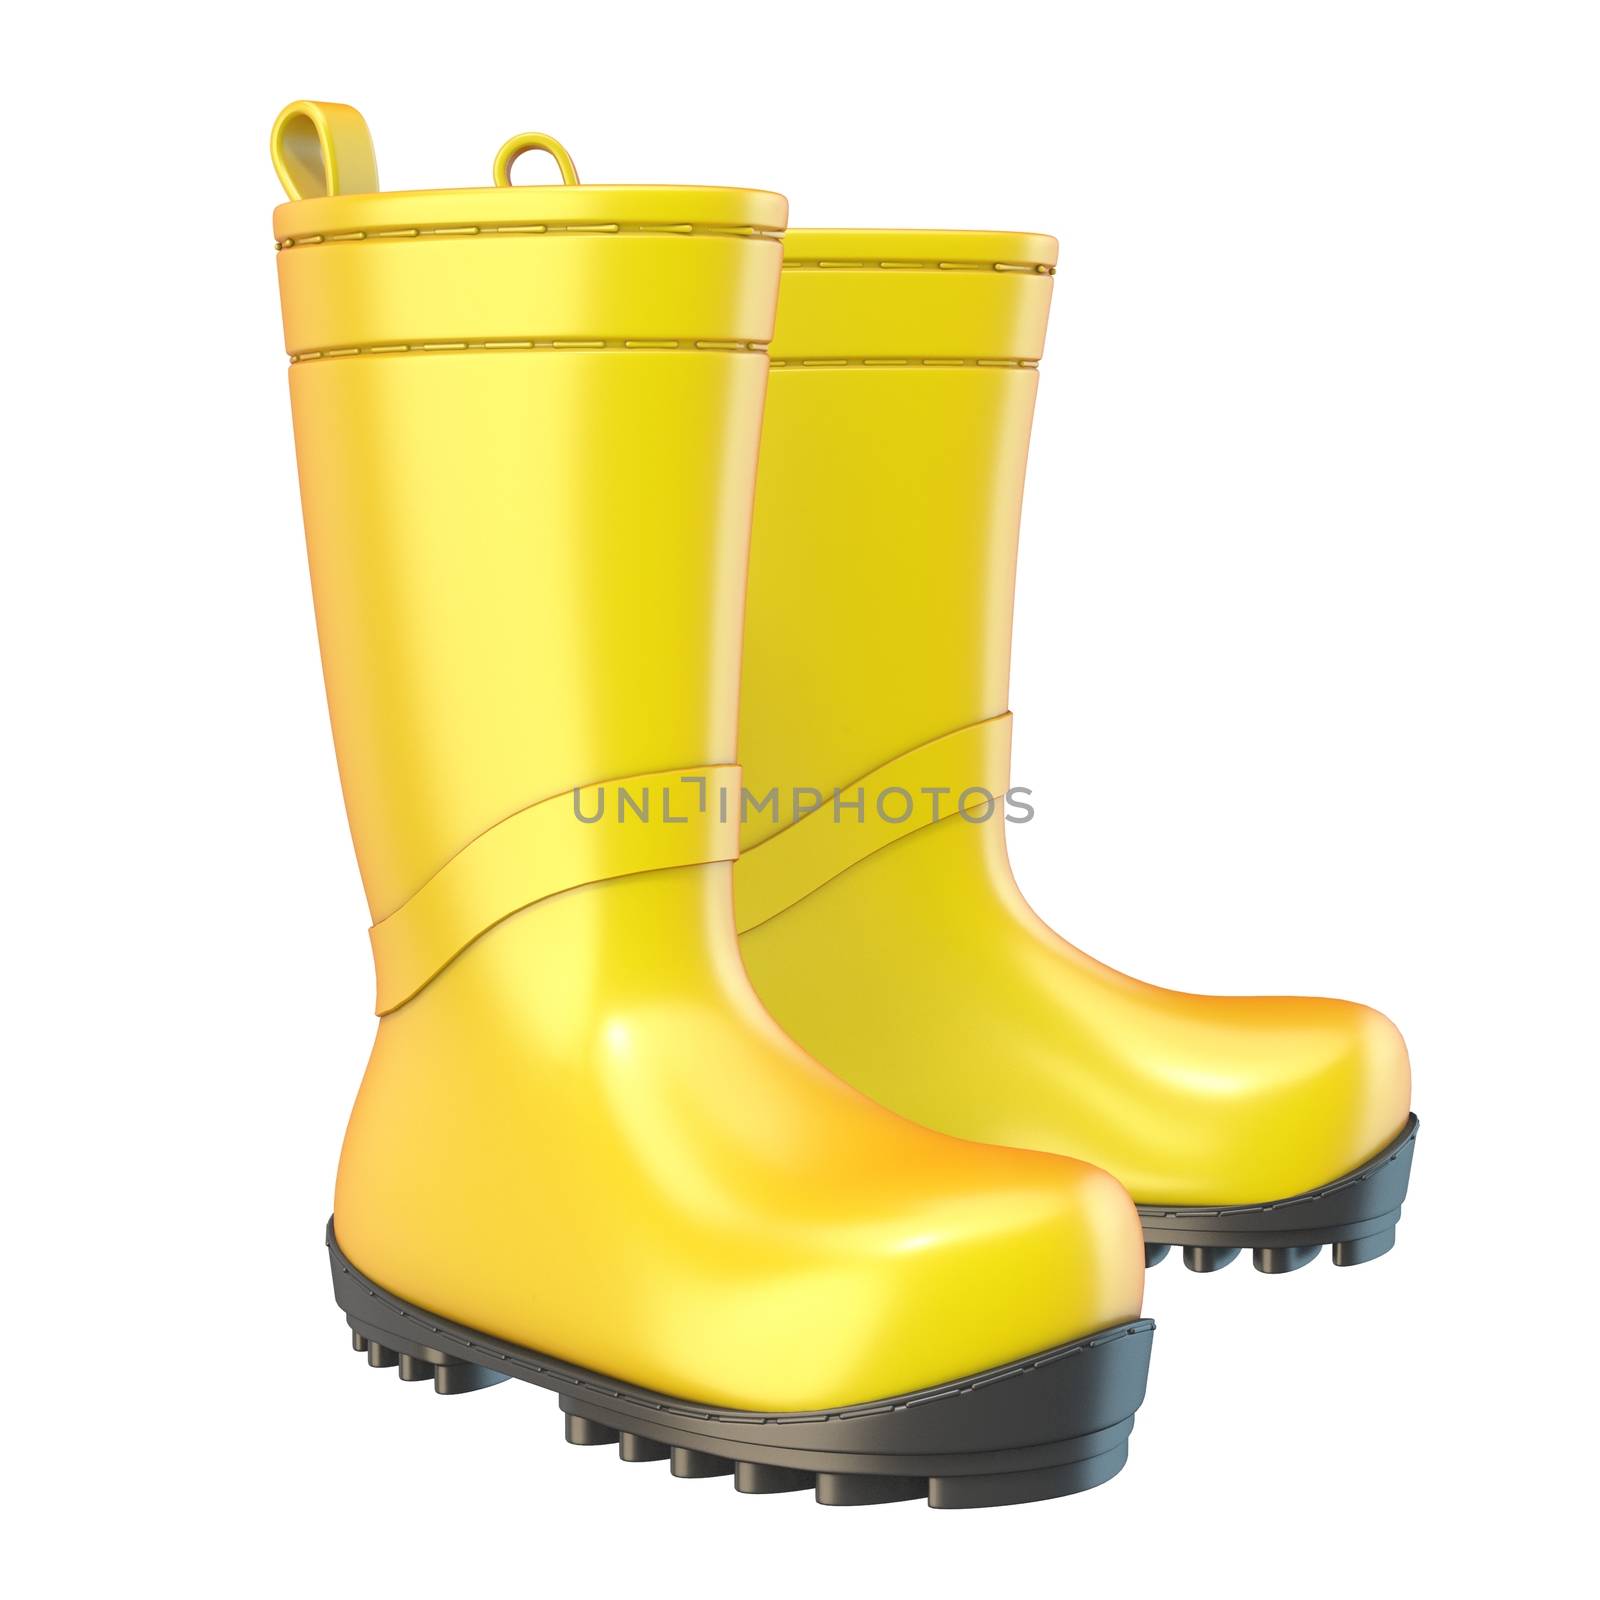 Yellow rain boots 3D render illustration isolated on white background